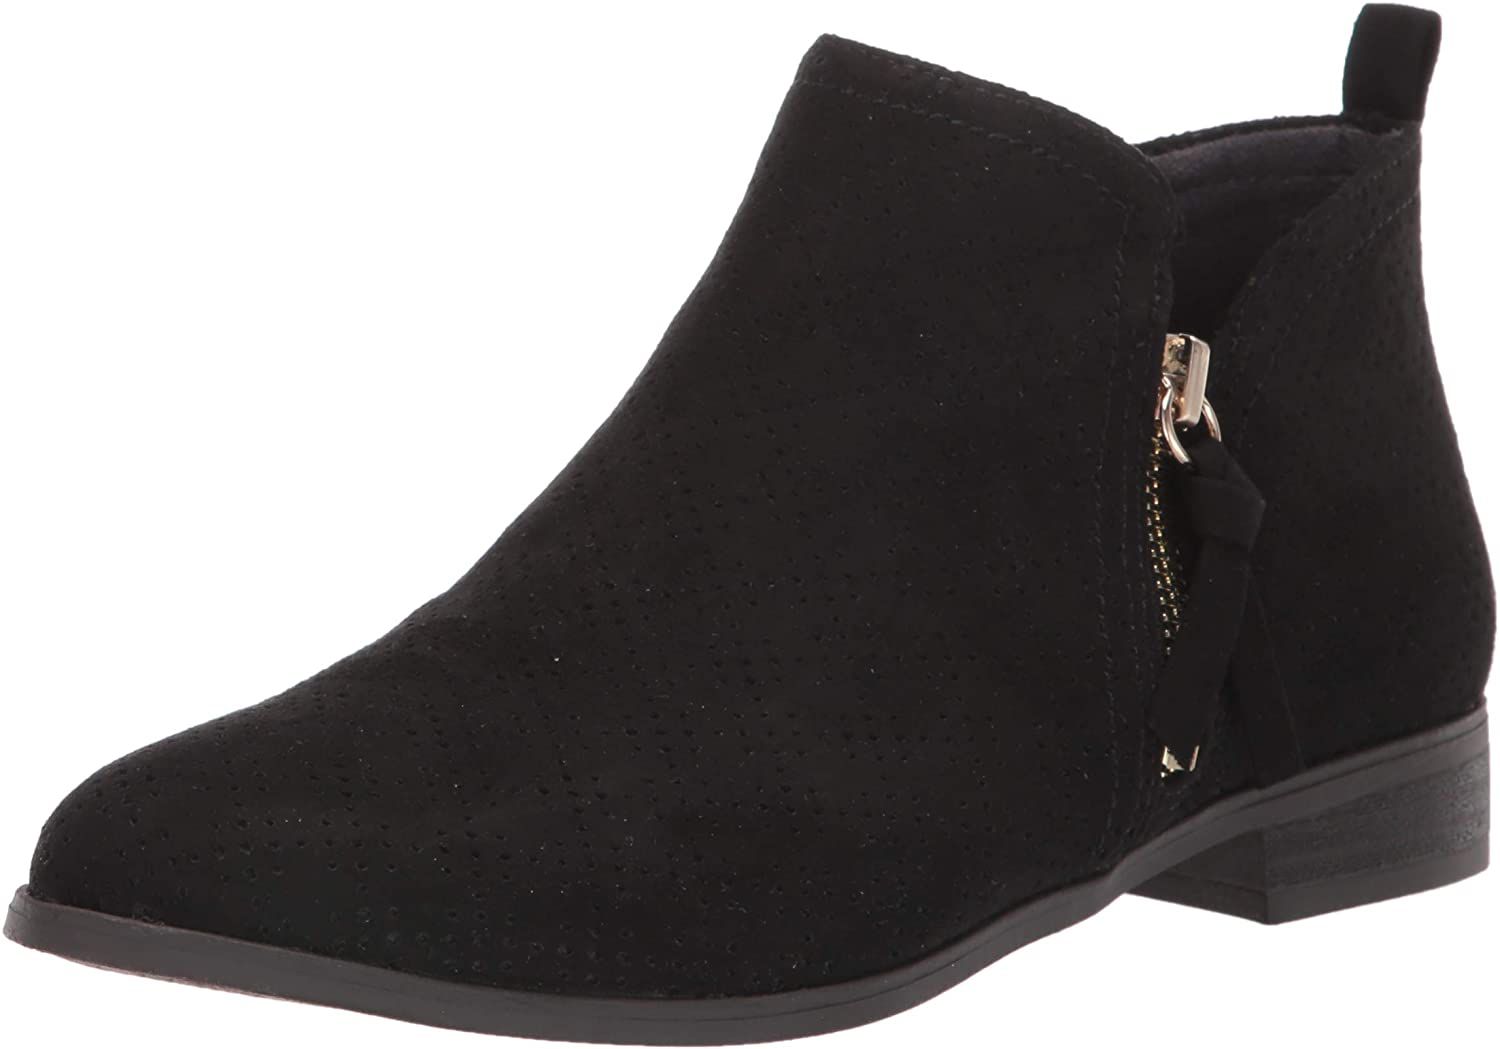 how-to-wear-ankle-boots-Dr. Scholl's Women's Rate Ankle Boot